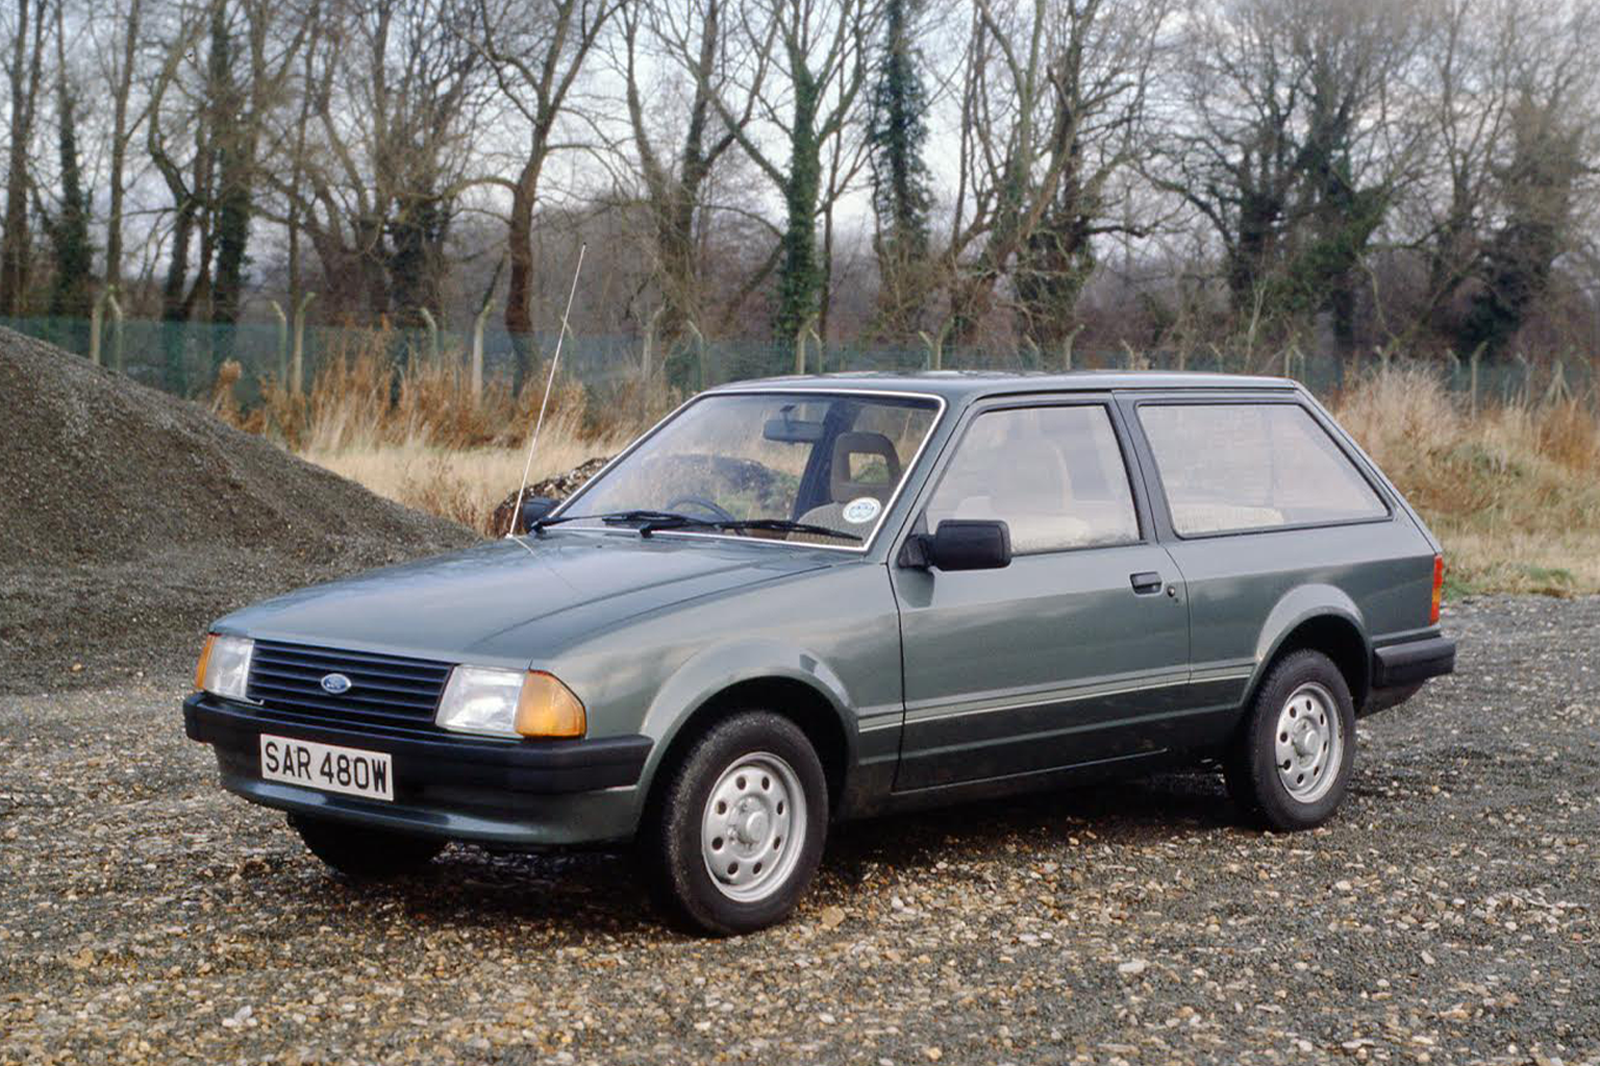 https://www.autocar.co.uk/sites/autocar.co.uk/files/images/car-reviews/first-drives/legacy/unnamed.png